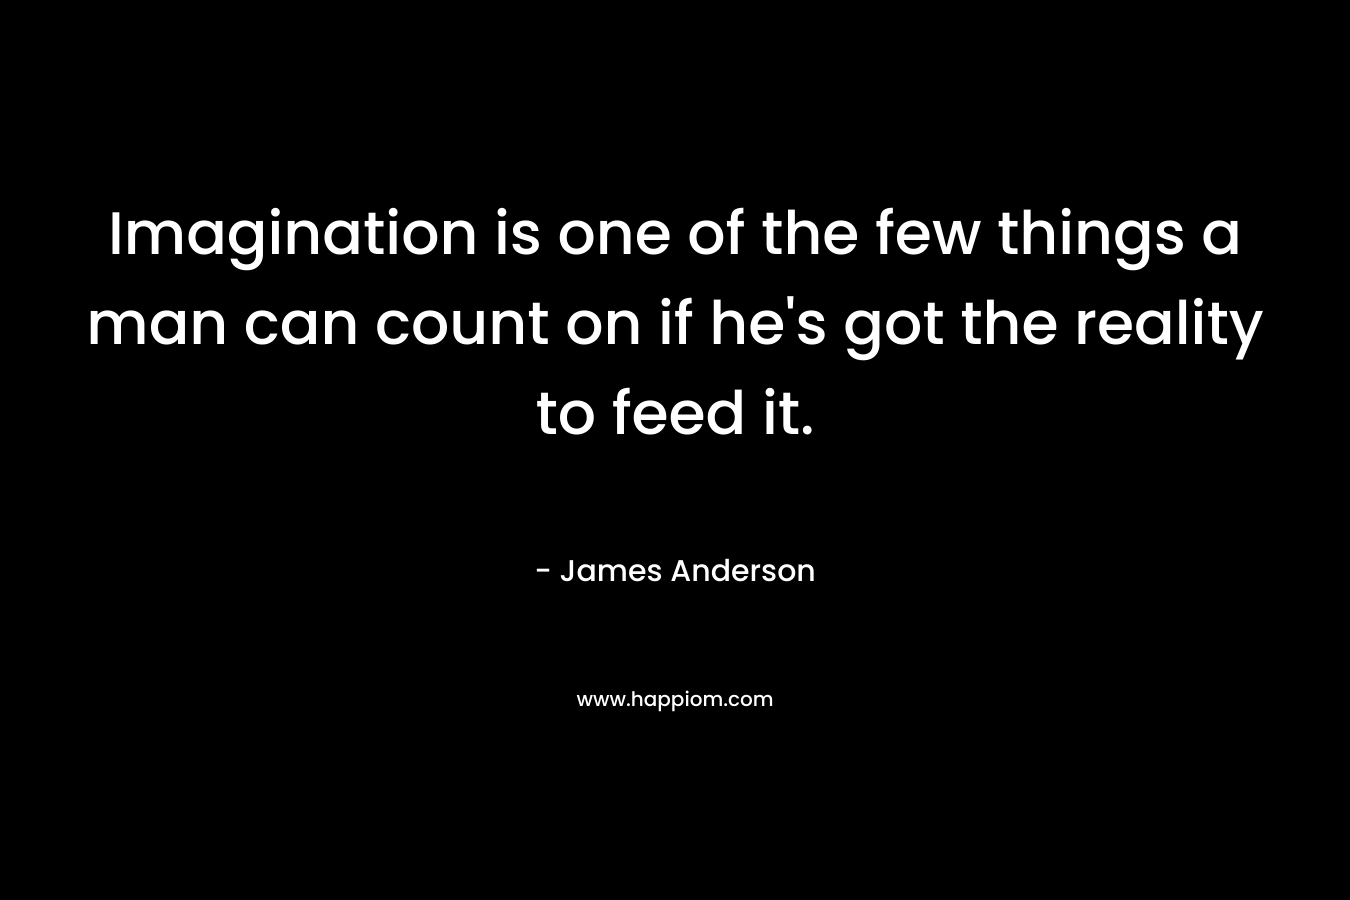 Imagination is one of the few things a man can count on if he's got the reality to feed it.